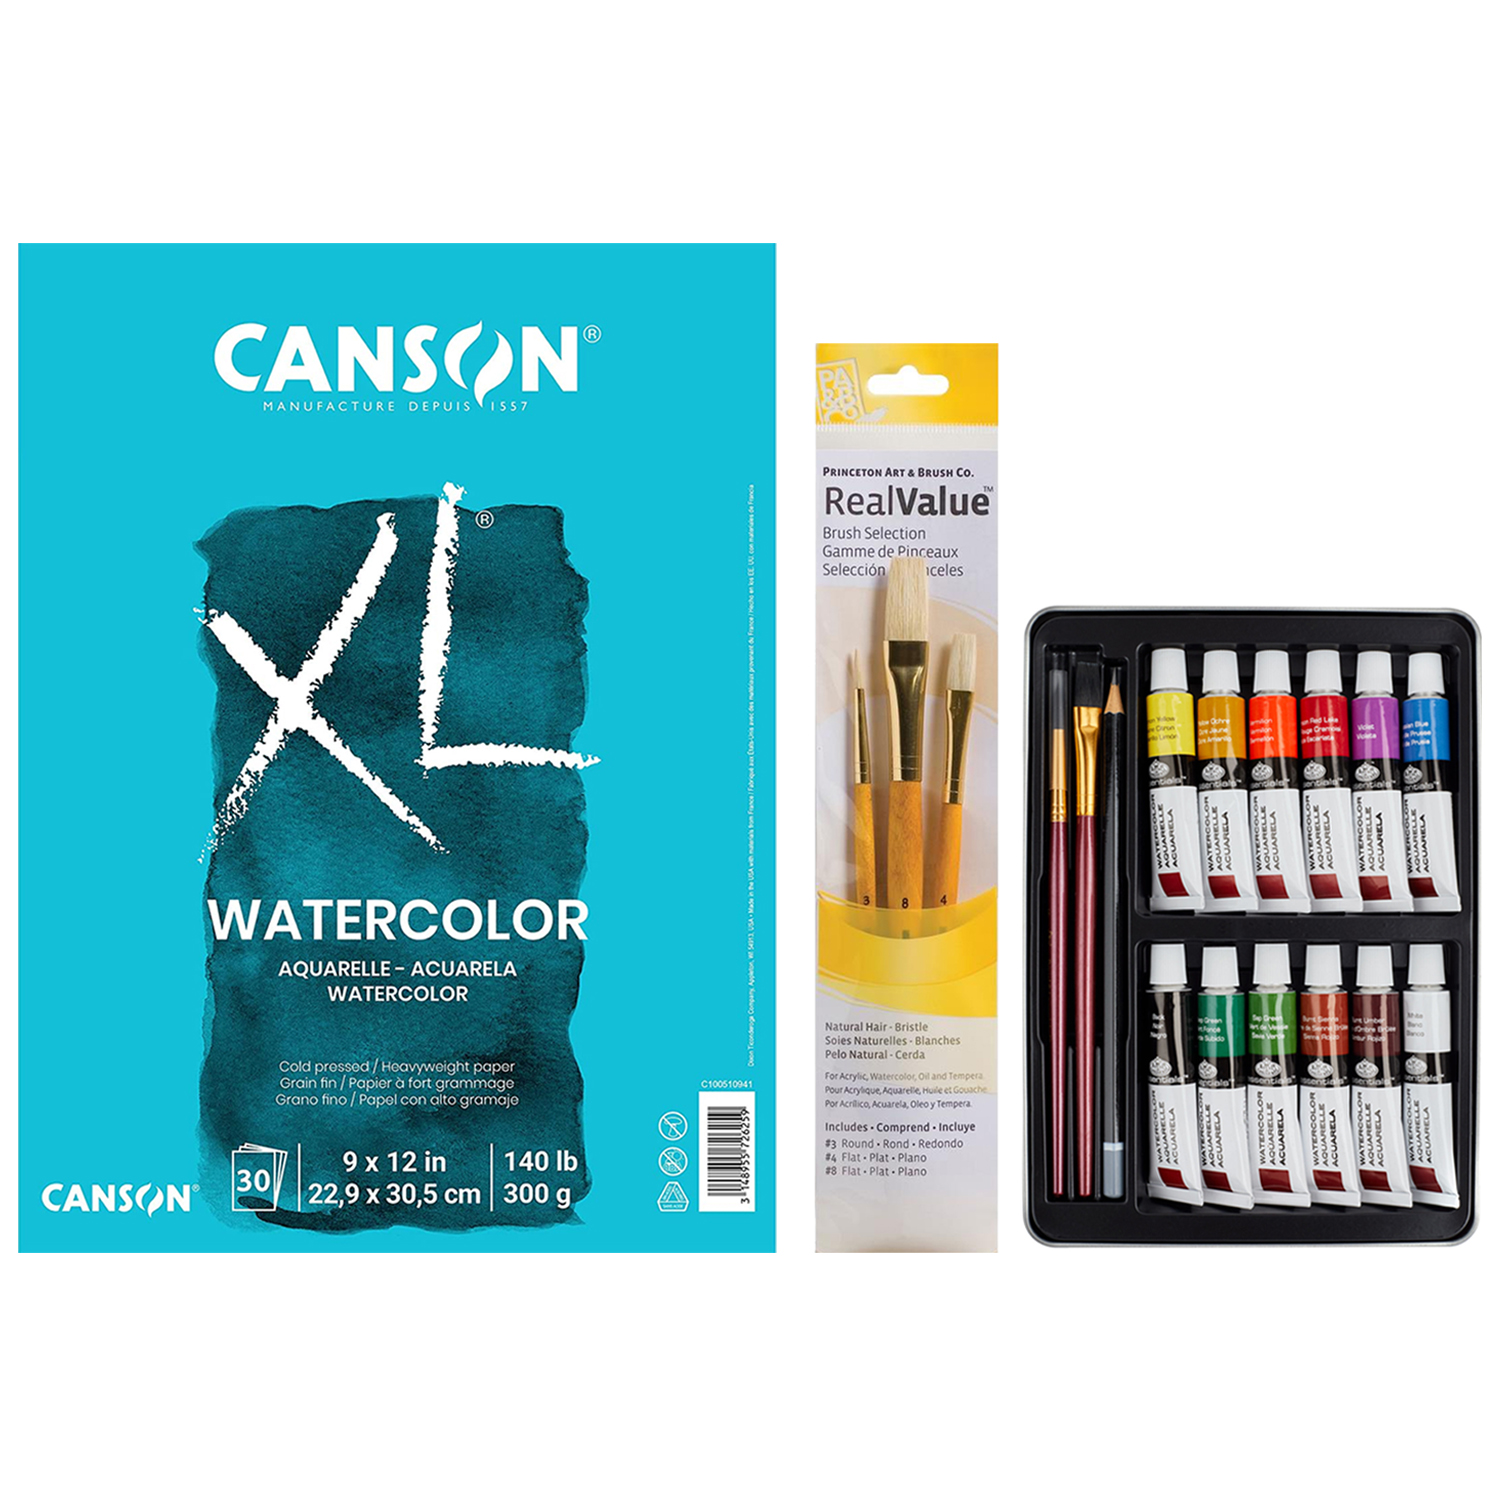 Canson XL Series Watercolor Textured Paper Pad for Paint, Pencil, Ink, Charcoal, Pastel, and Acrylic, Fold Over, 140 Pound, 12 x 18 inch, 30 Sheets